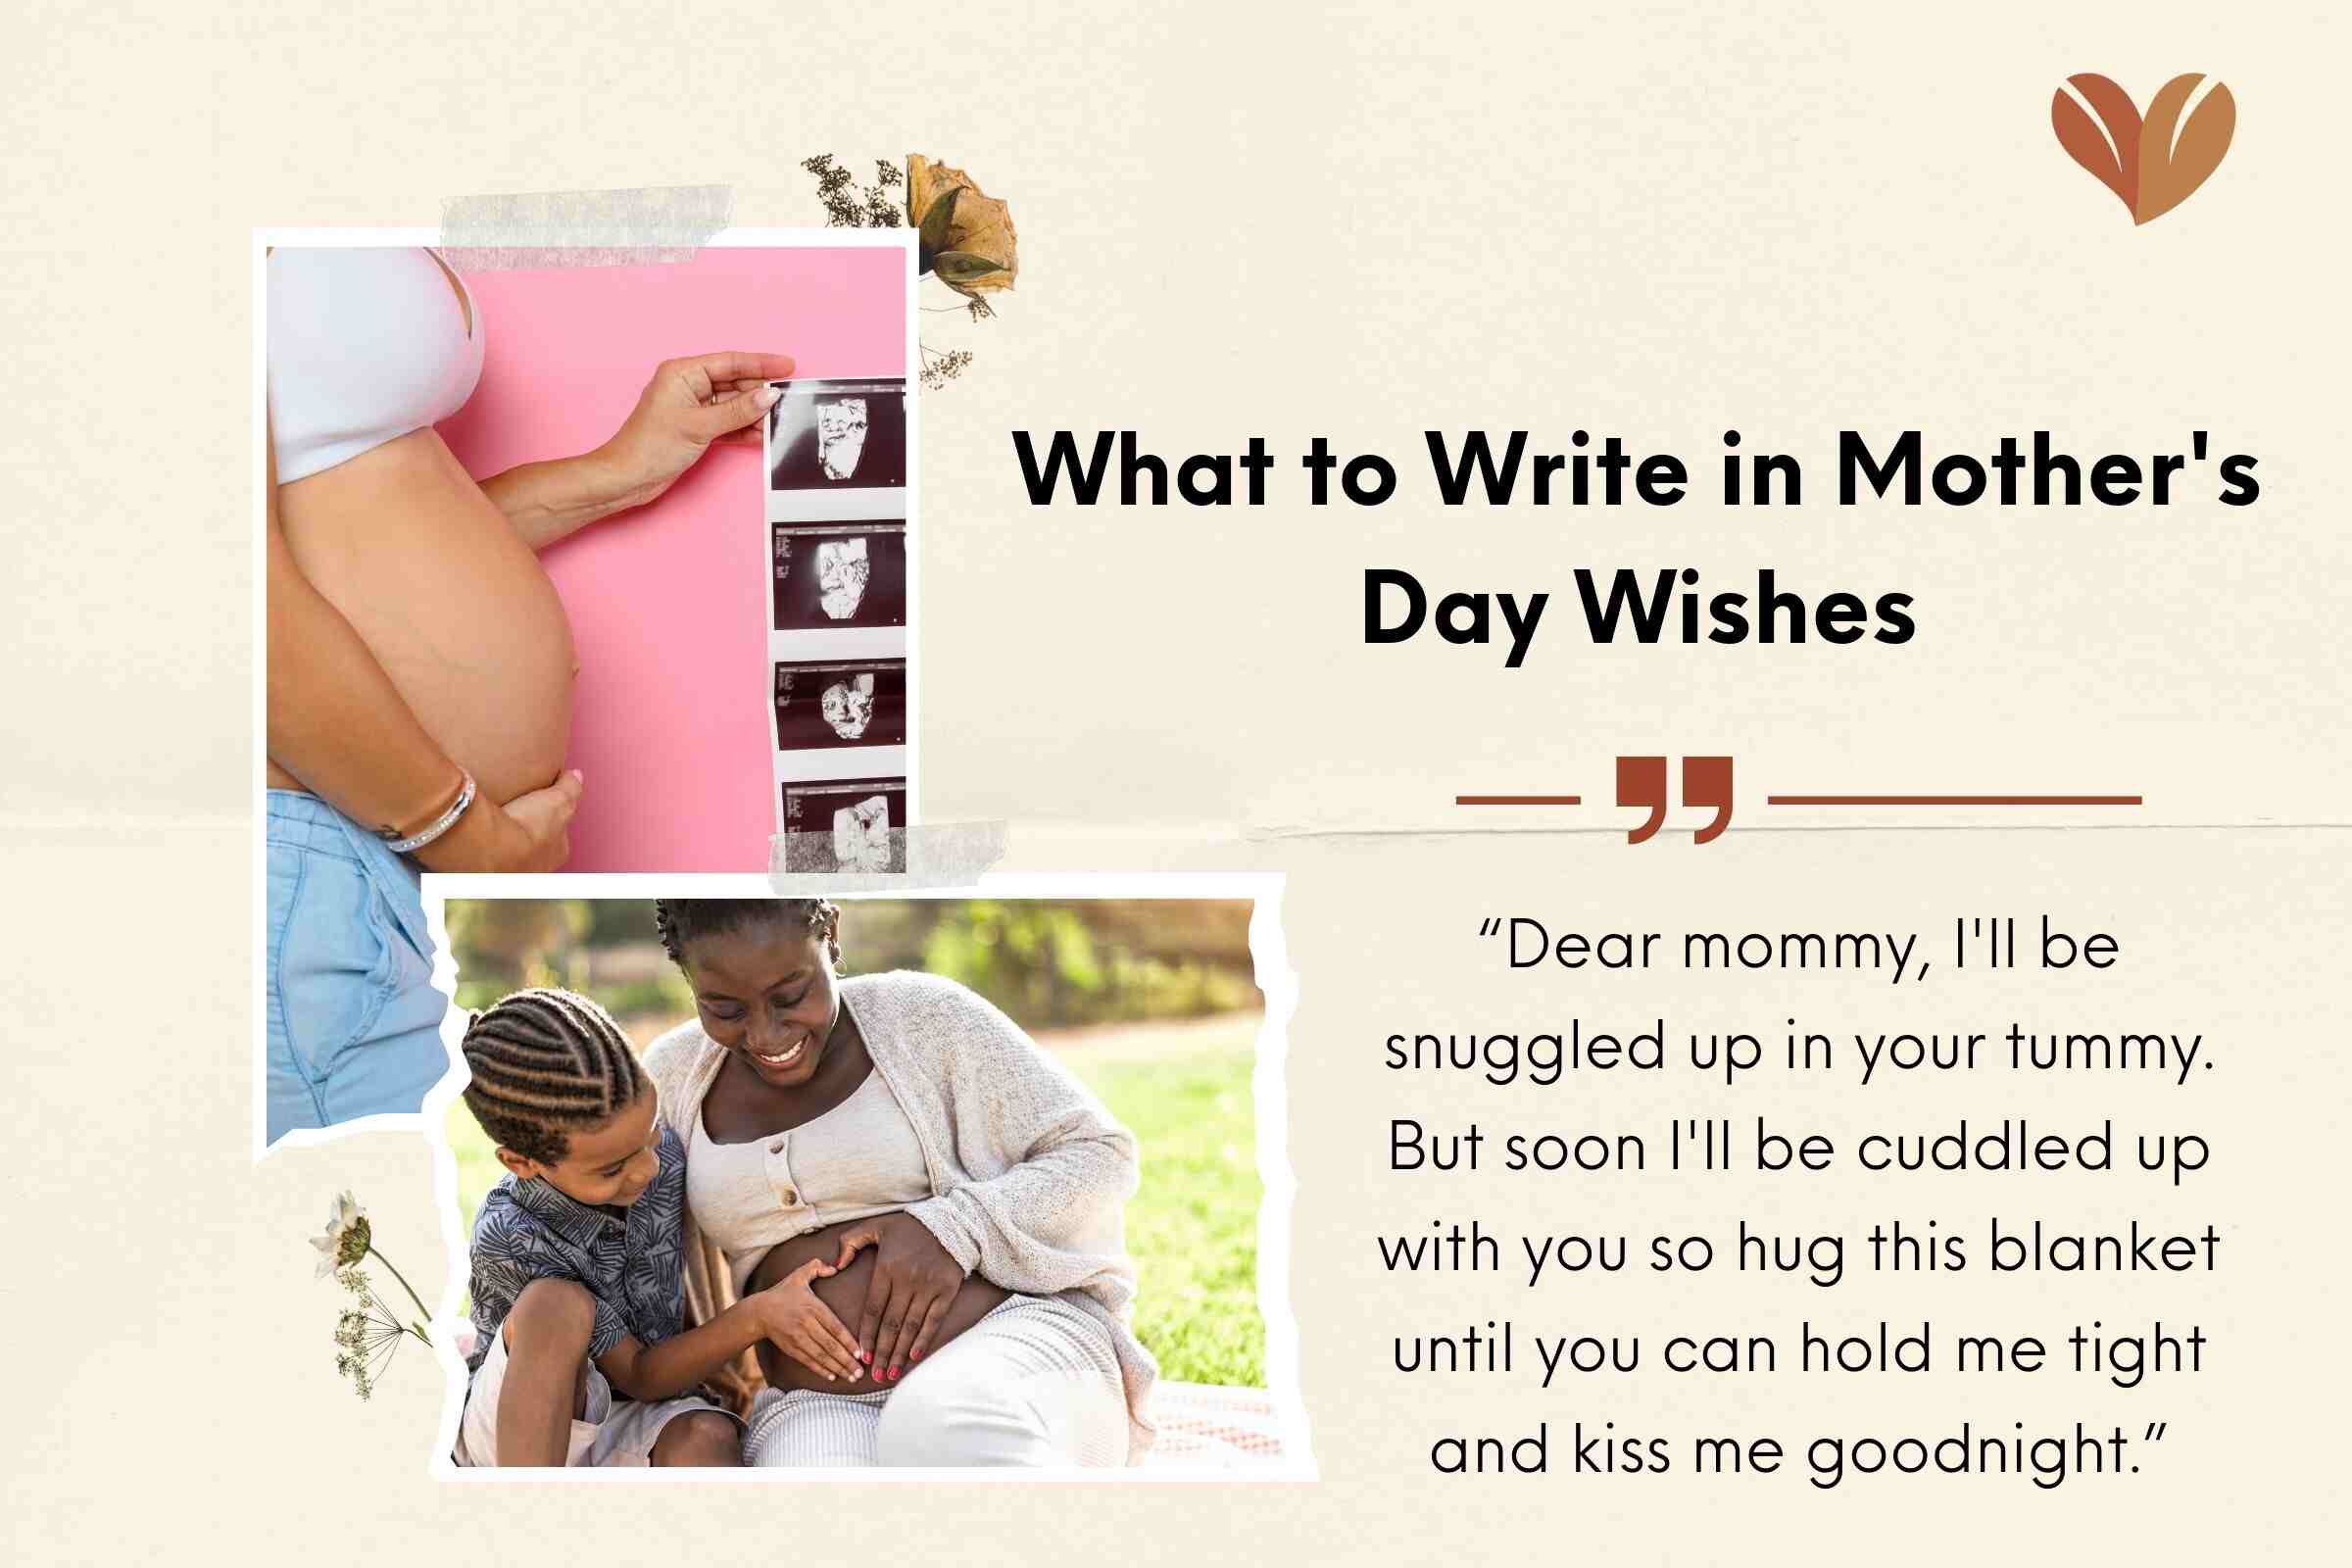 What to Write in a Card: Inspiring Mother's Day Wishes for Expecting Moms